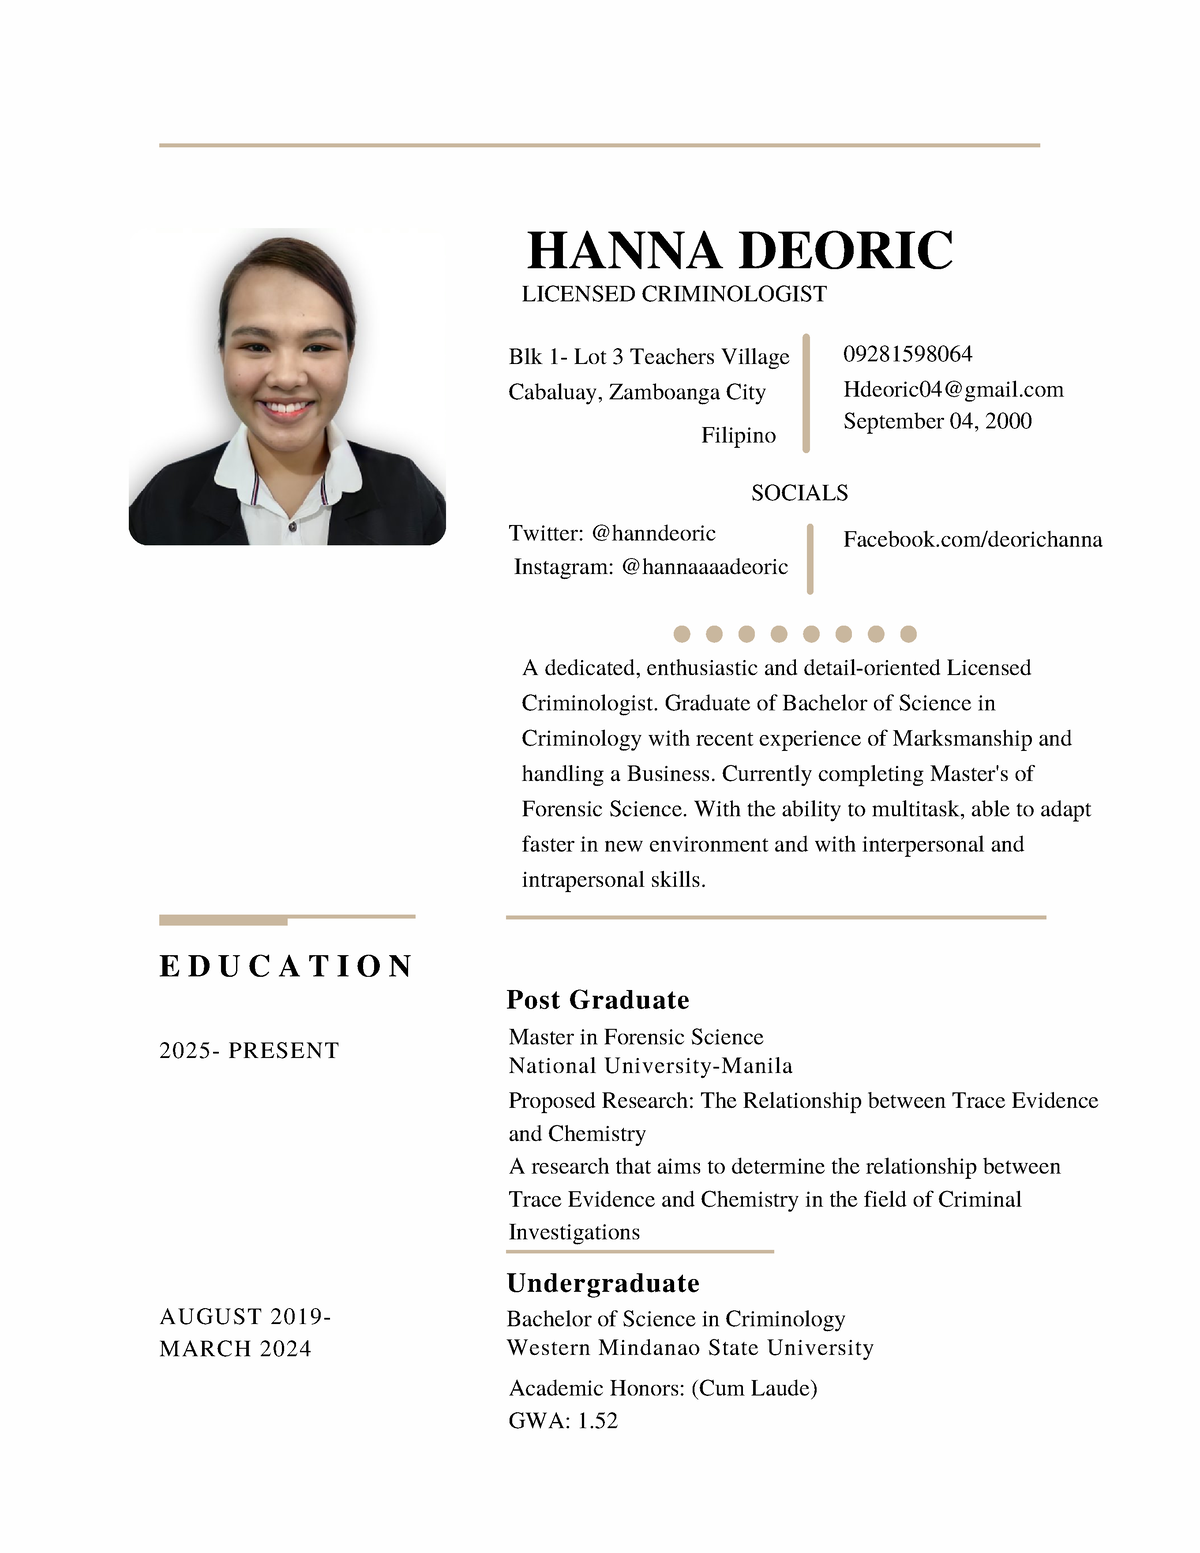 (Curriculum Vitae) - A dedicated, enthusiastic and detail-oriented